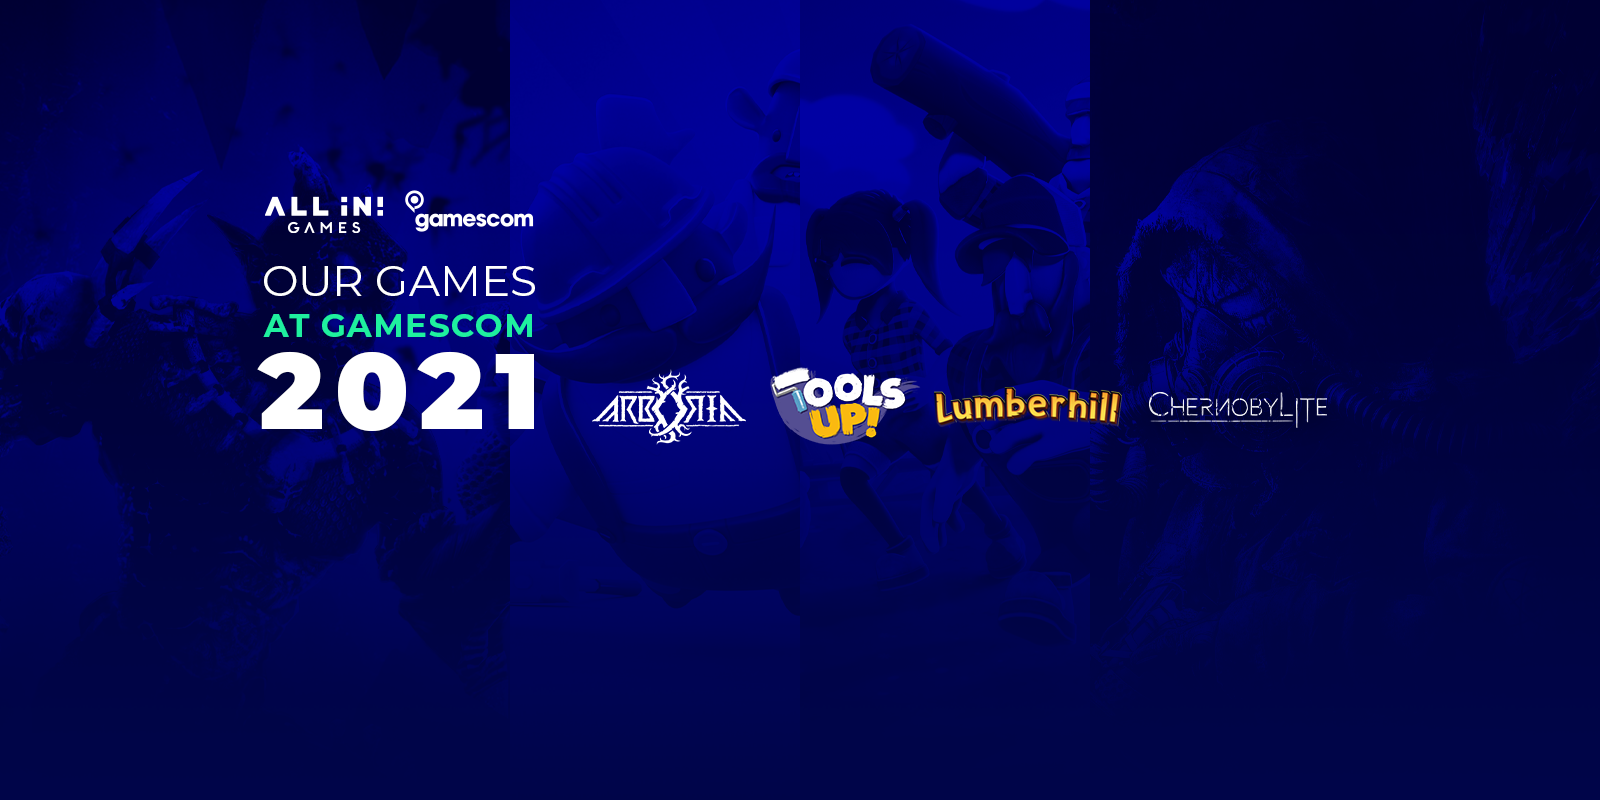 All in! Games at Gamescom 2021